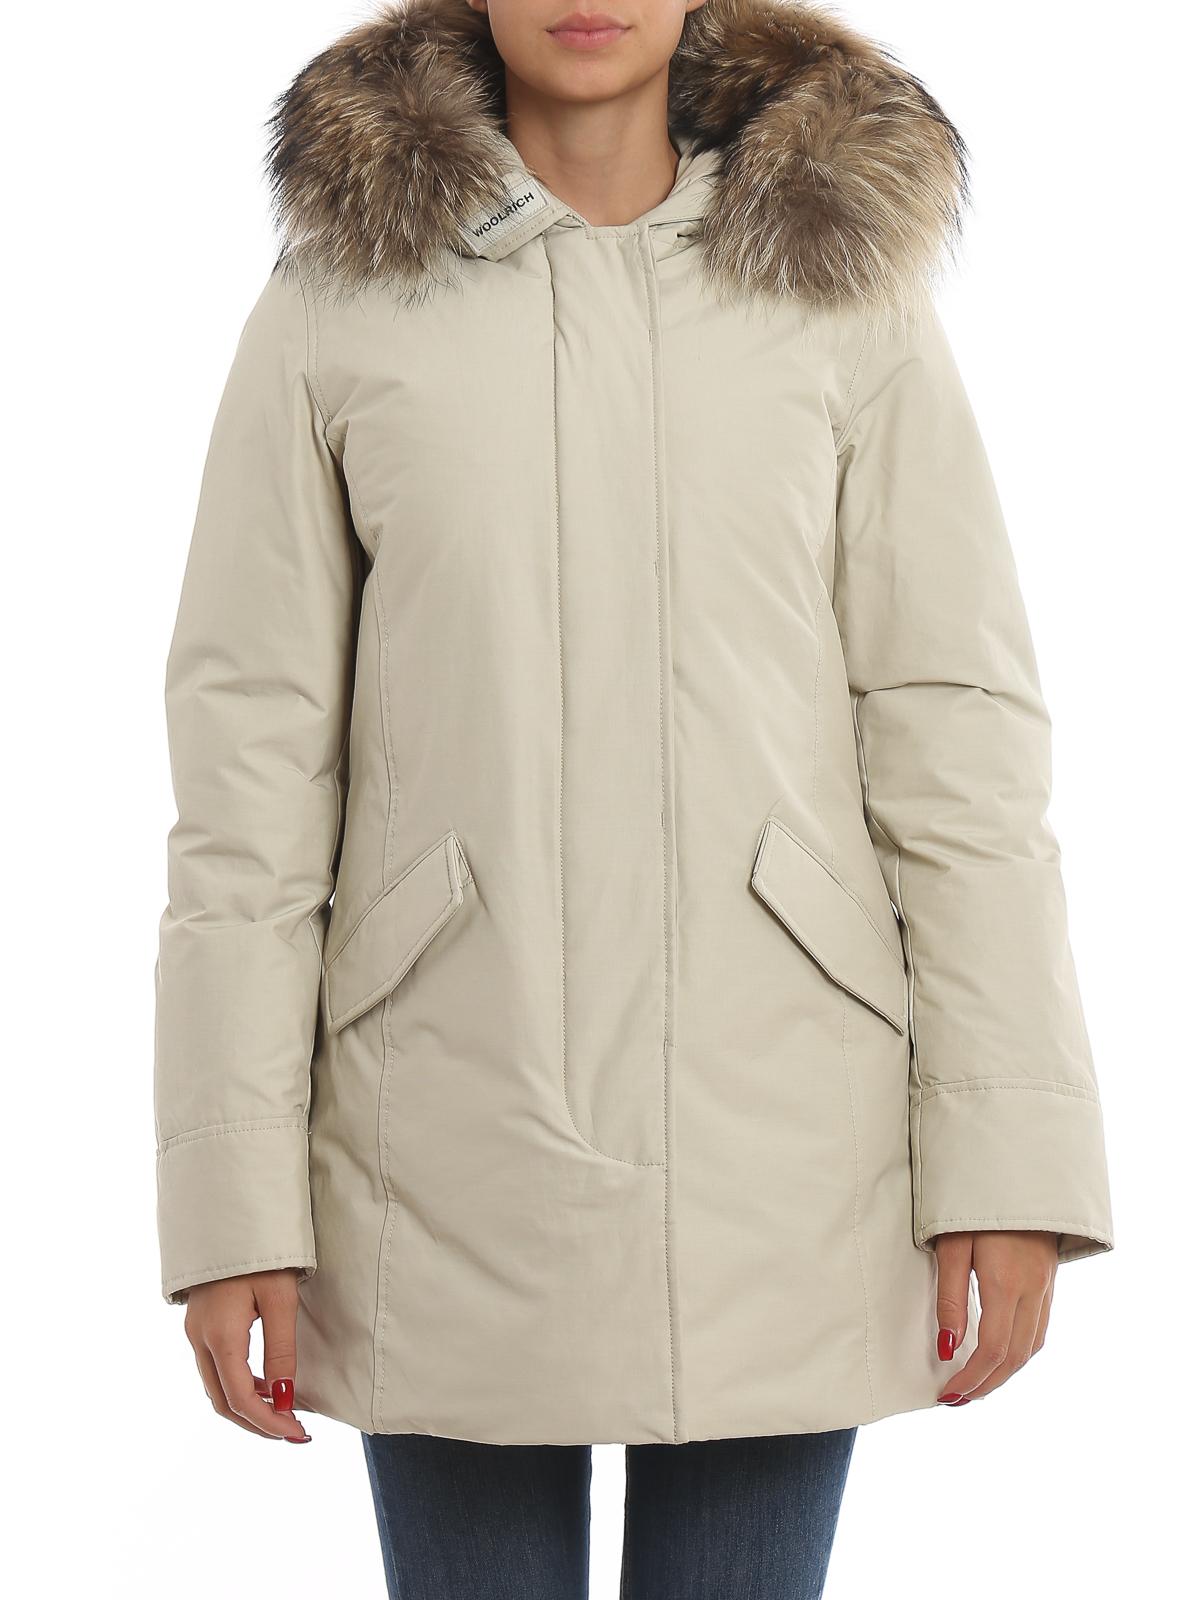 Woolrich Fur Arctic Parka White Igloo Padded Coat - Lyst